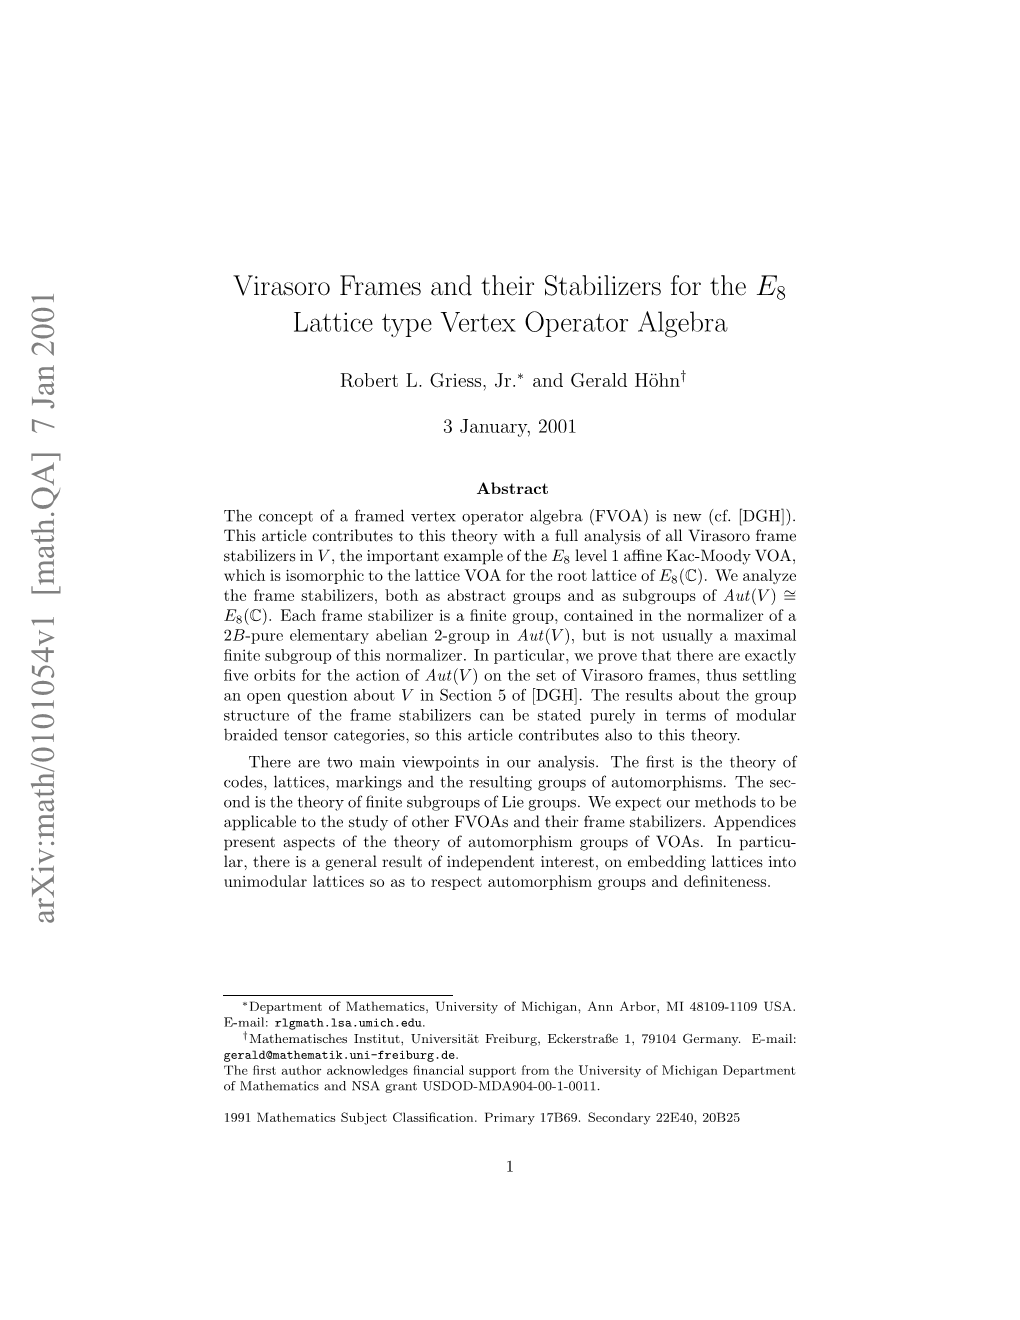 Virasoro Frames and Their Stabilizers for the E8 Lattice Type Vertex